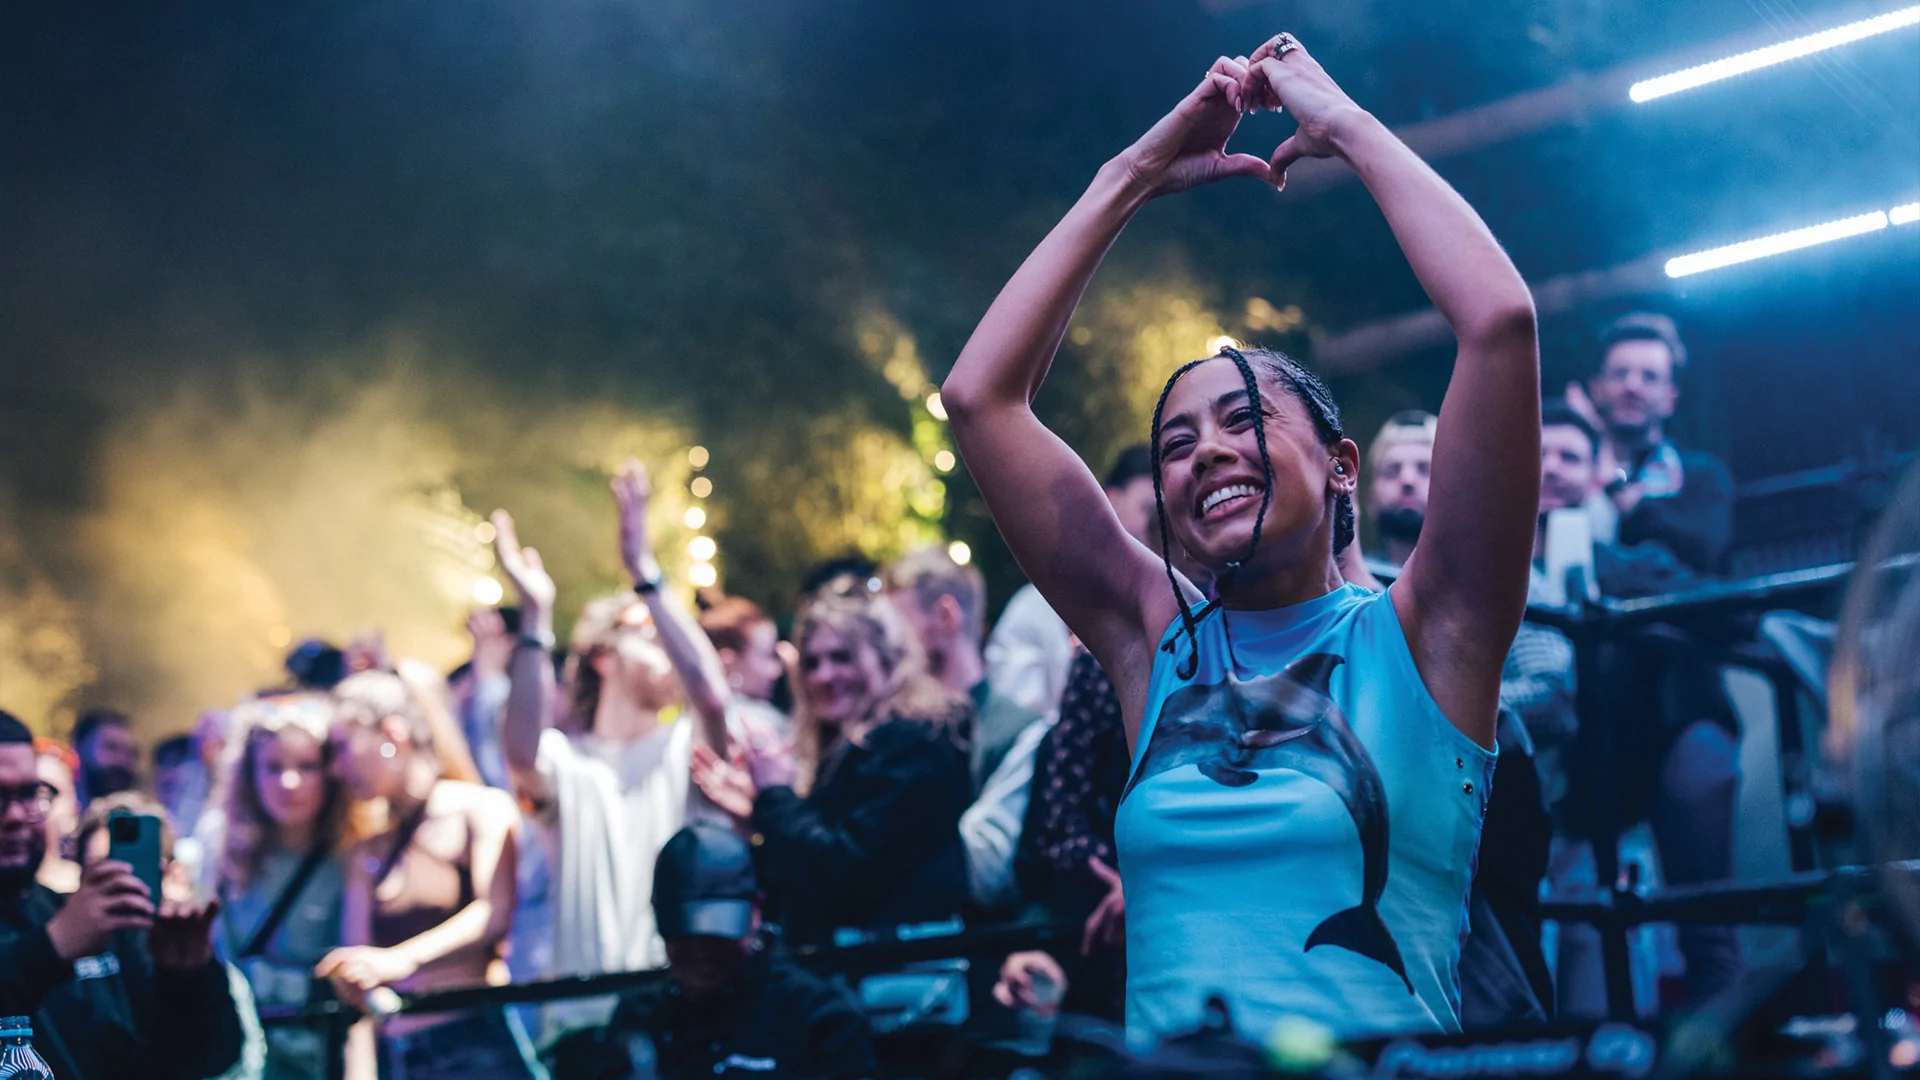 Photo of Jayda G DJing. She is grinning widely and has her hands above her head making a love heart shape. Some members of the crowd are dancing behind her